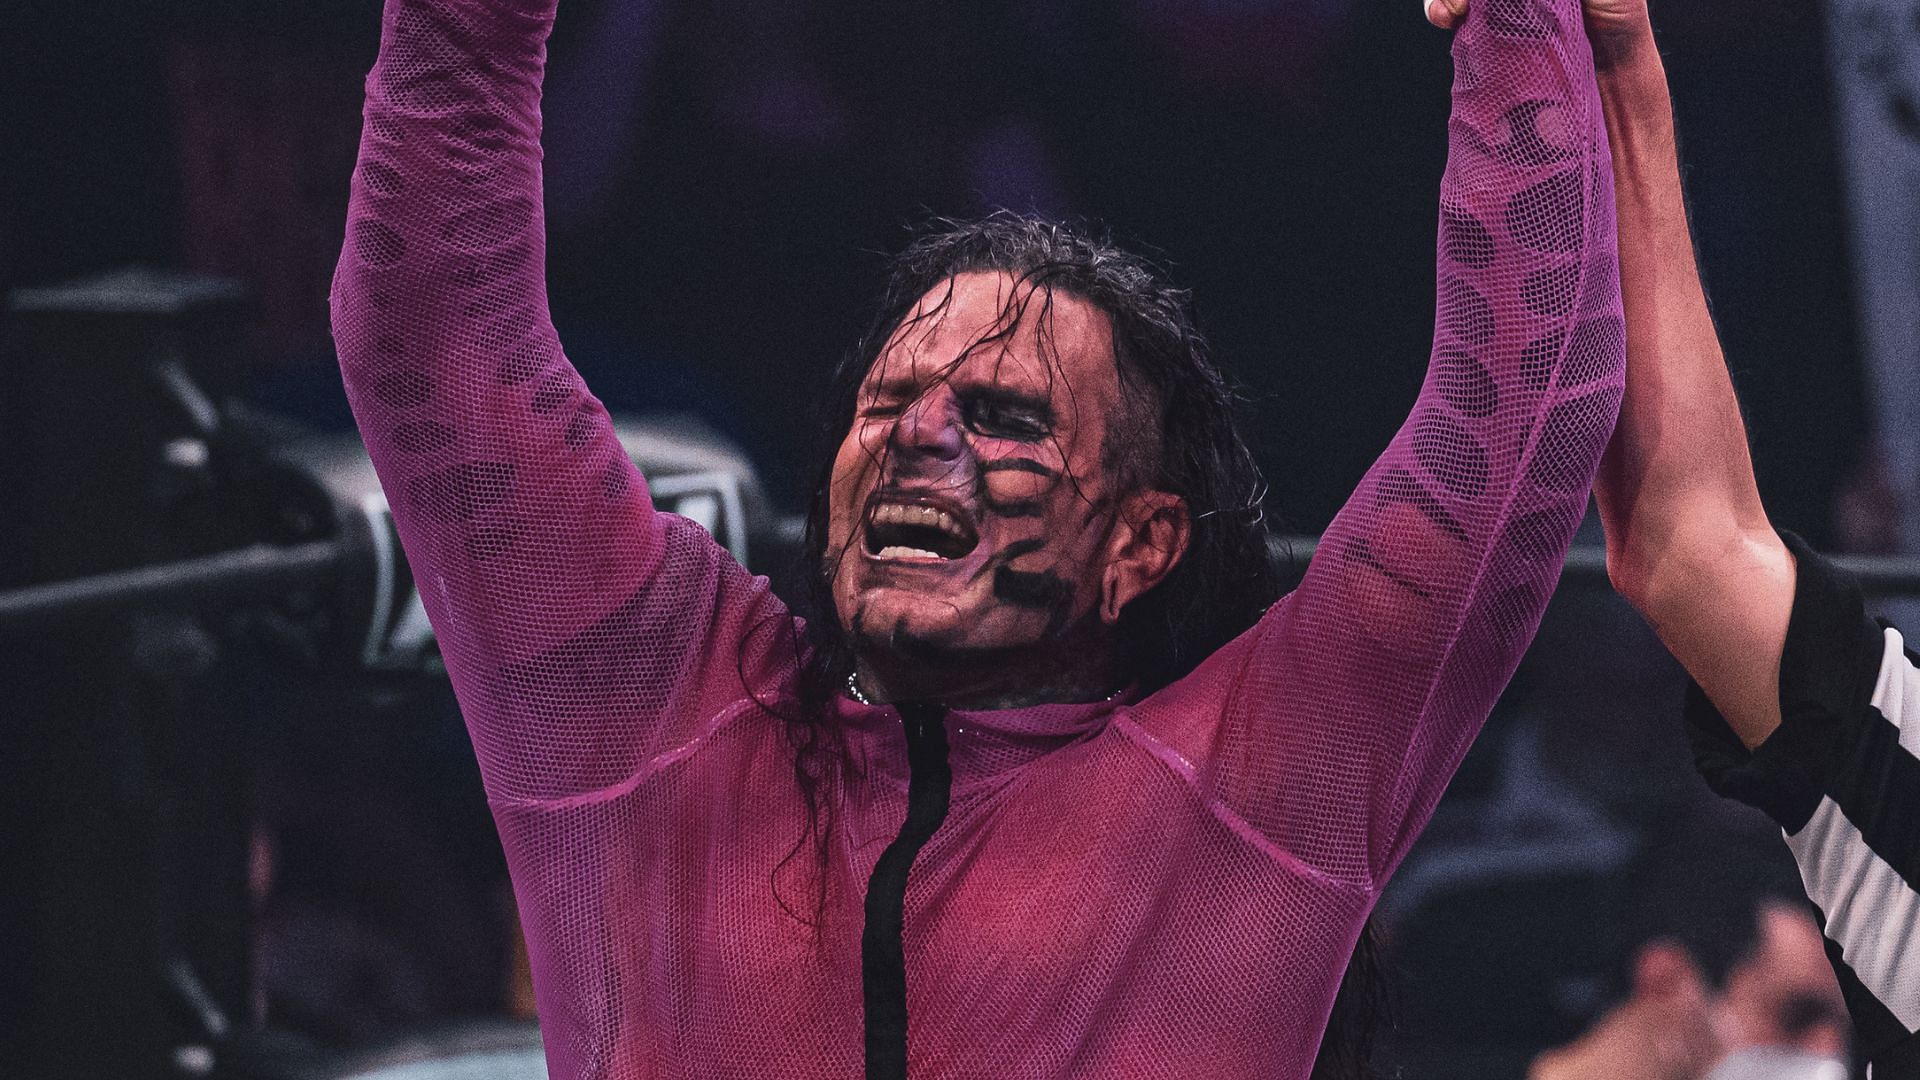 Jeff Hardy at an AEW Dynamite event in 2022 (credit: Jay Lee Photography)